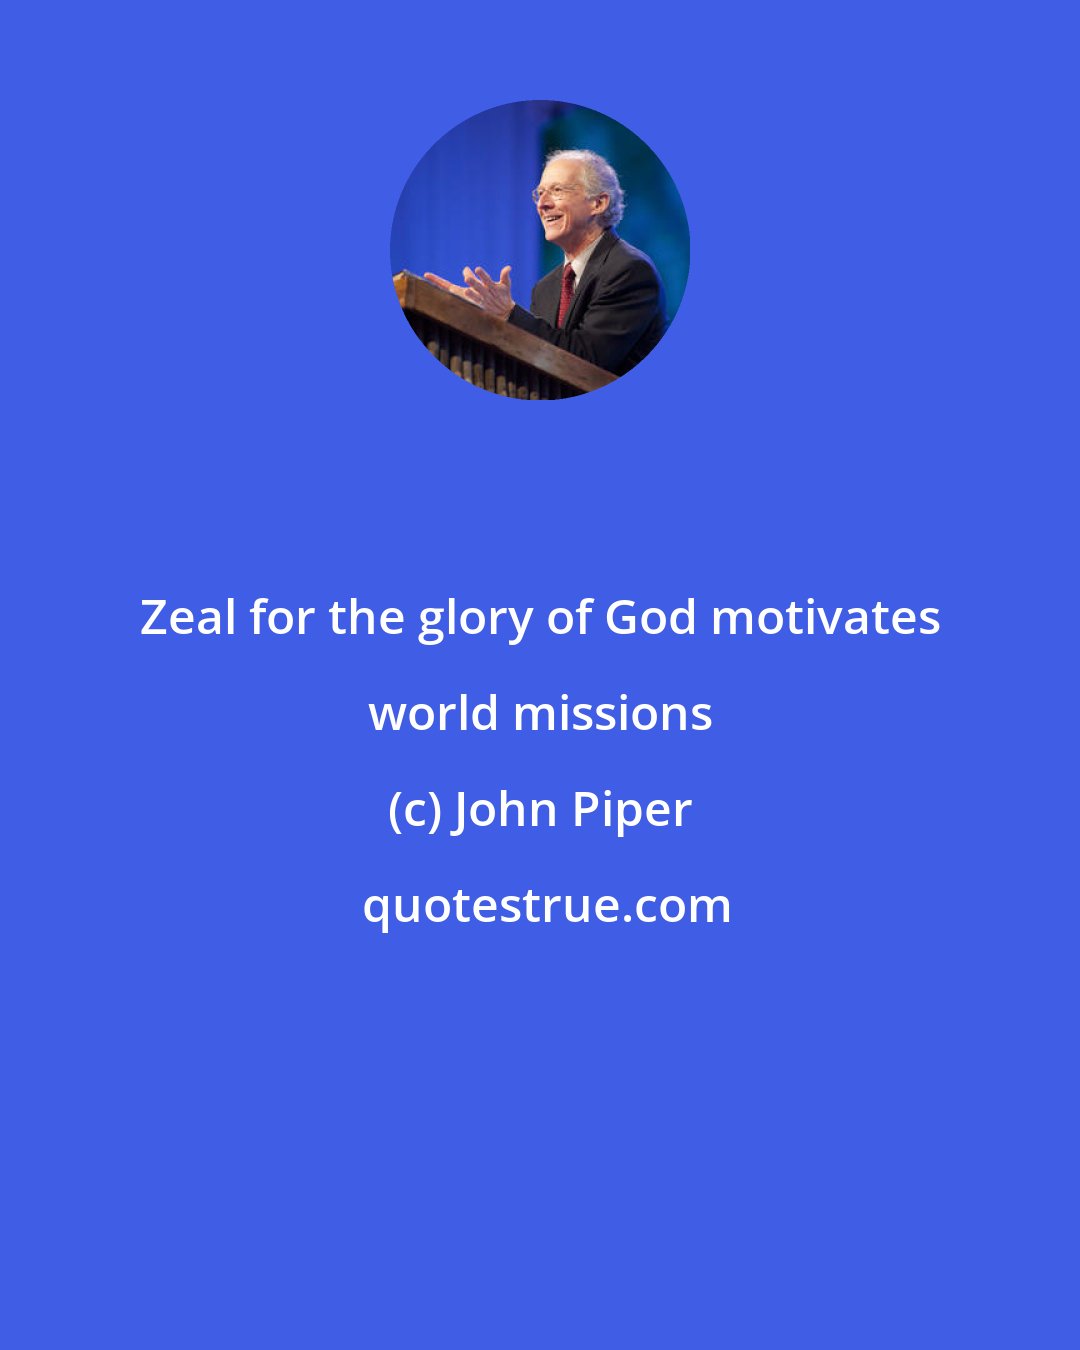 John Piper: Zeal for the glory of God motivates world missions